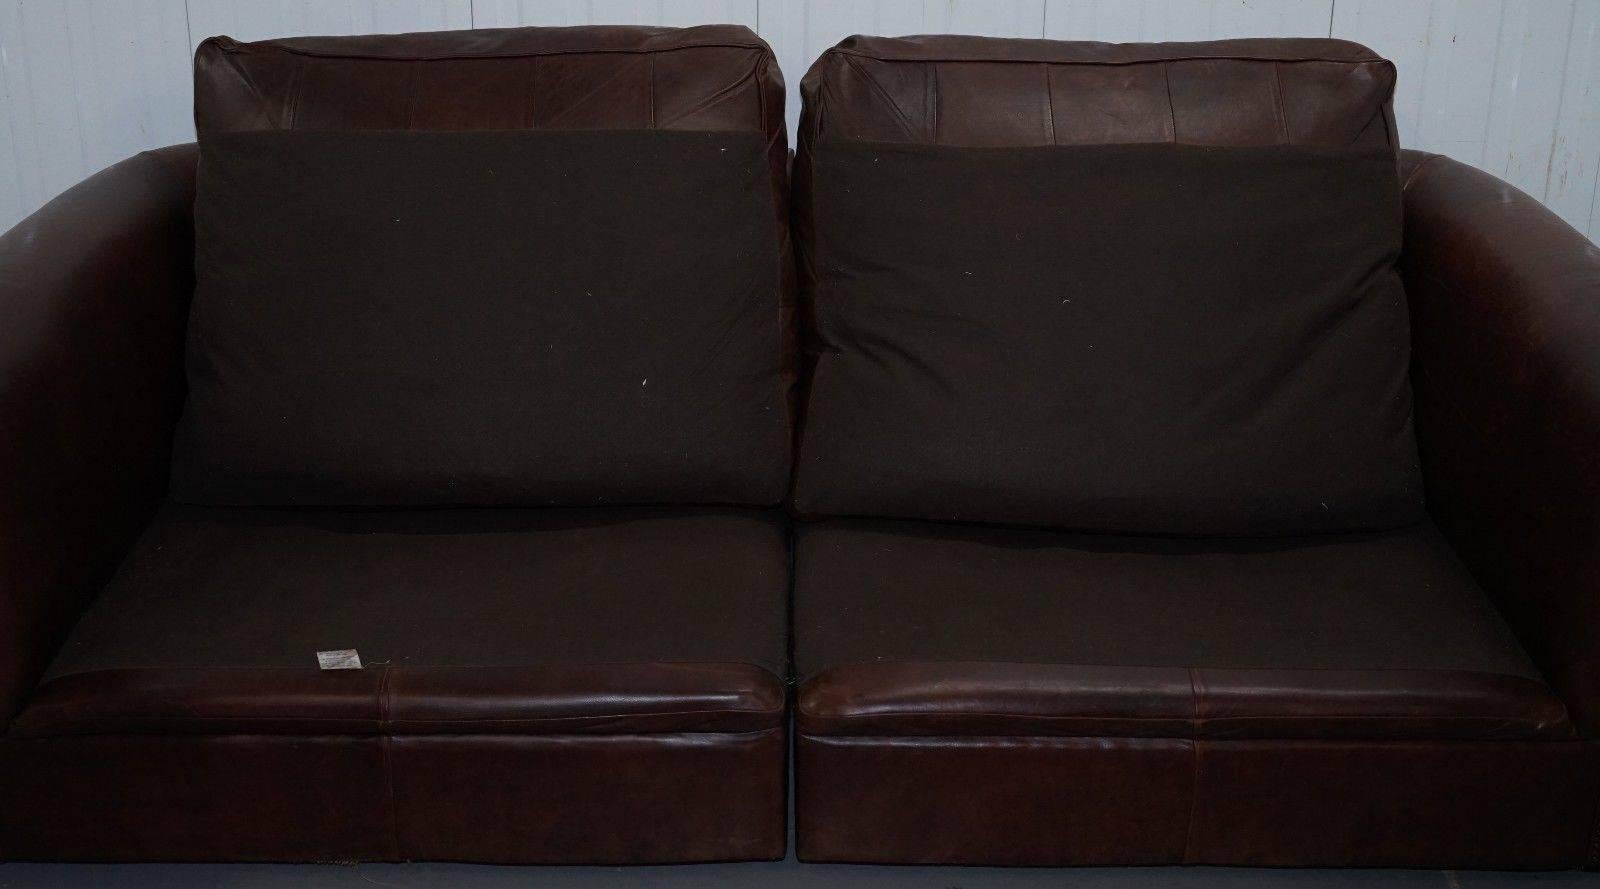 Knightsbridge Collin & Hayes Brown Leather Sofa Splits in Two Pieces 5